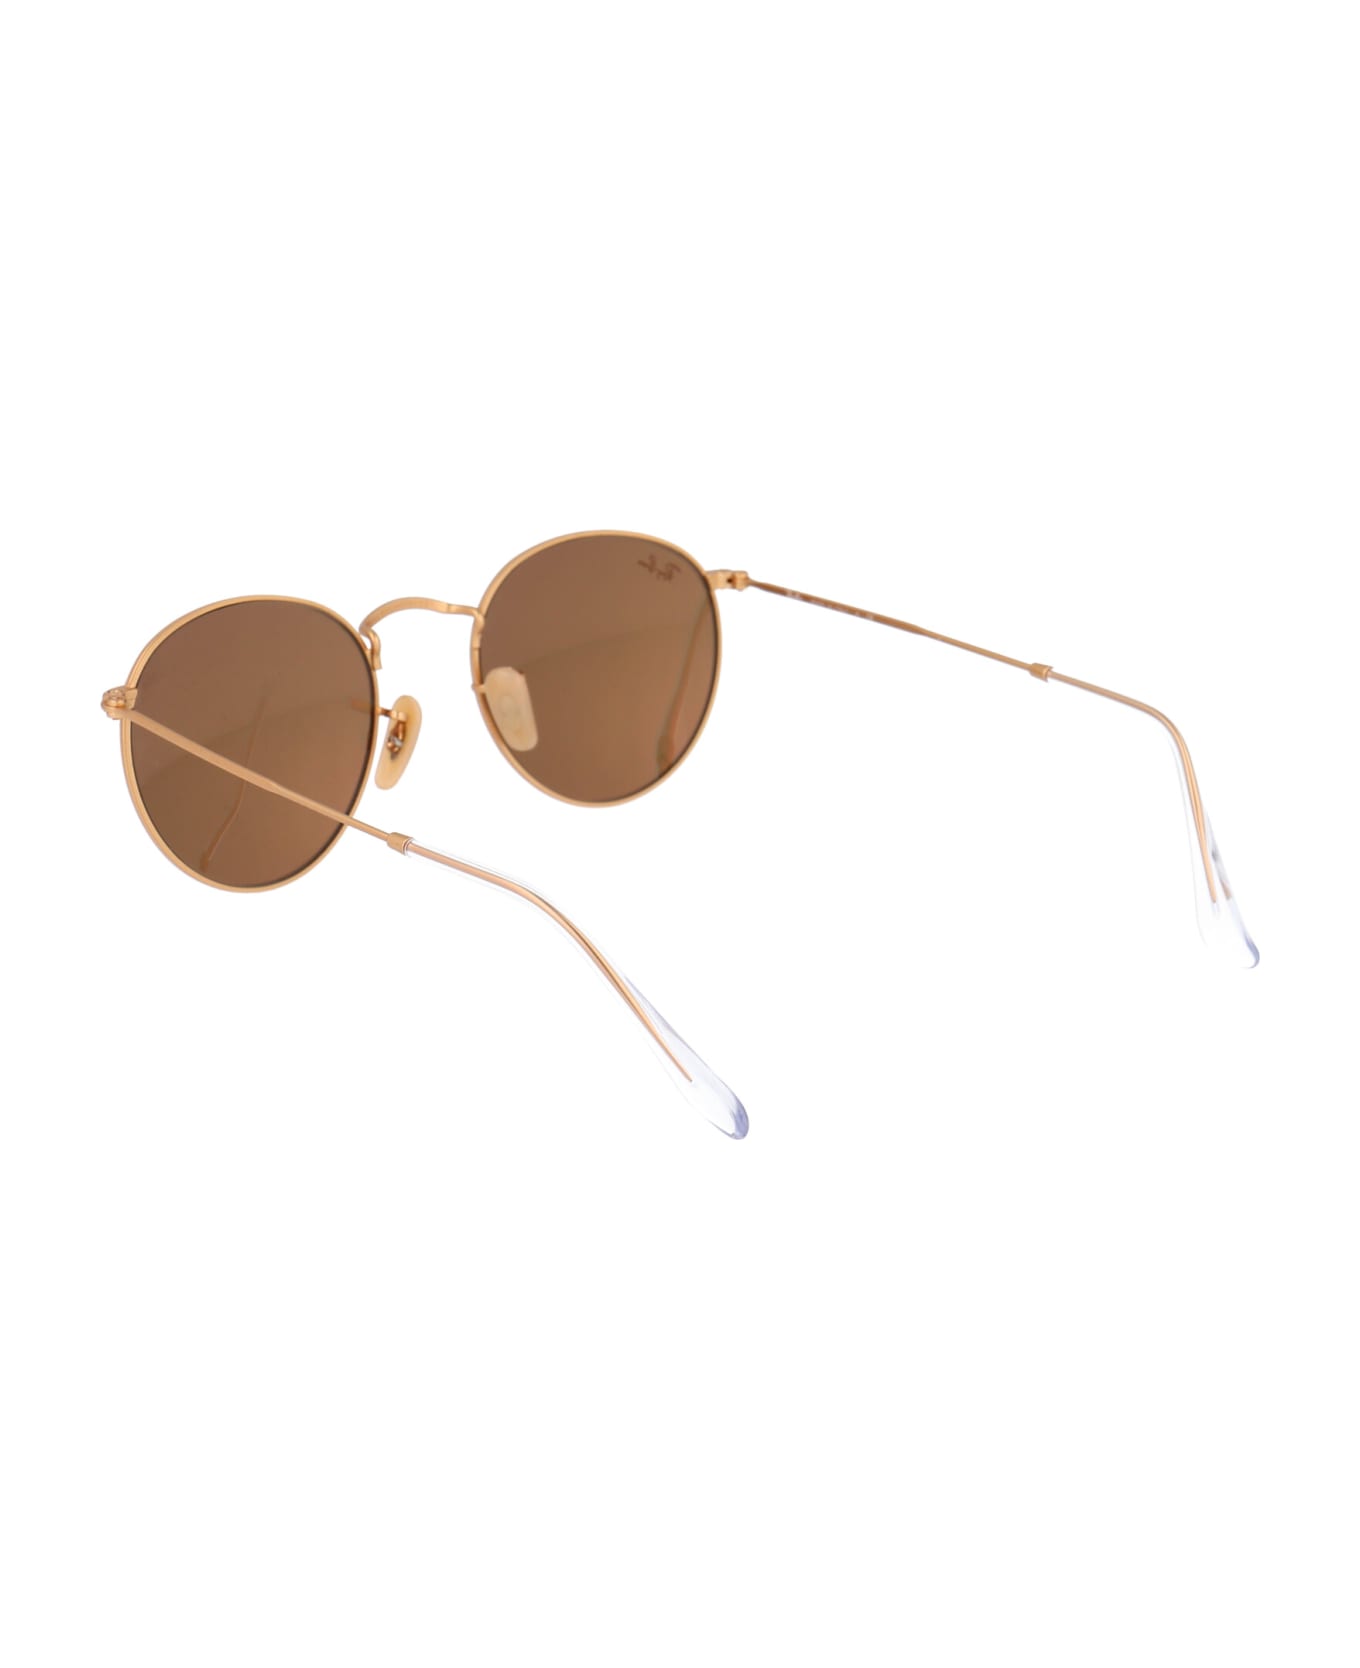 Ray-Ban Round Metal Sunglasses - 112/Z2 Gold